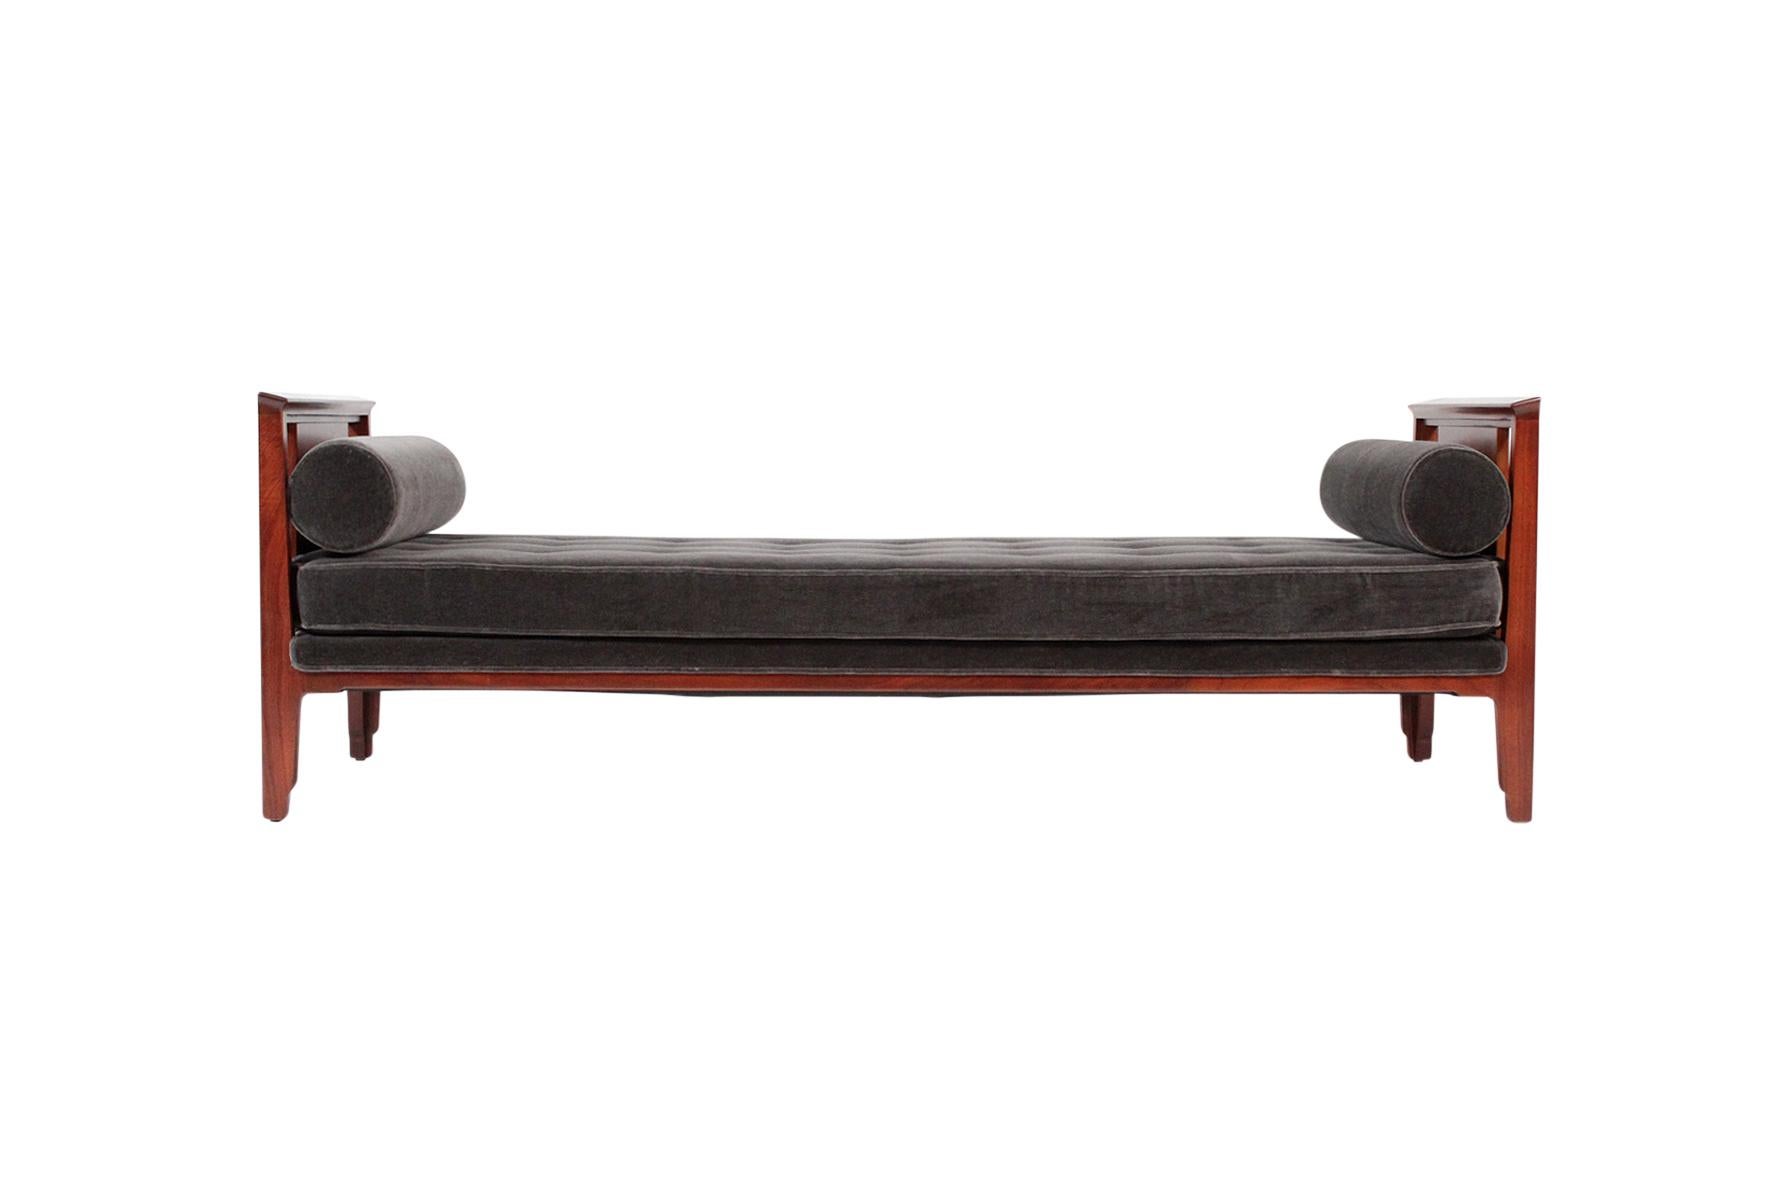 Daybed by Edward Wormley for Dunbar's Janus Collection. Fully restored and refinished with walnut frame and new charcoal mohair upholstery.